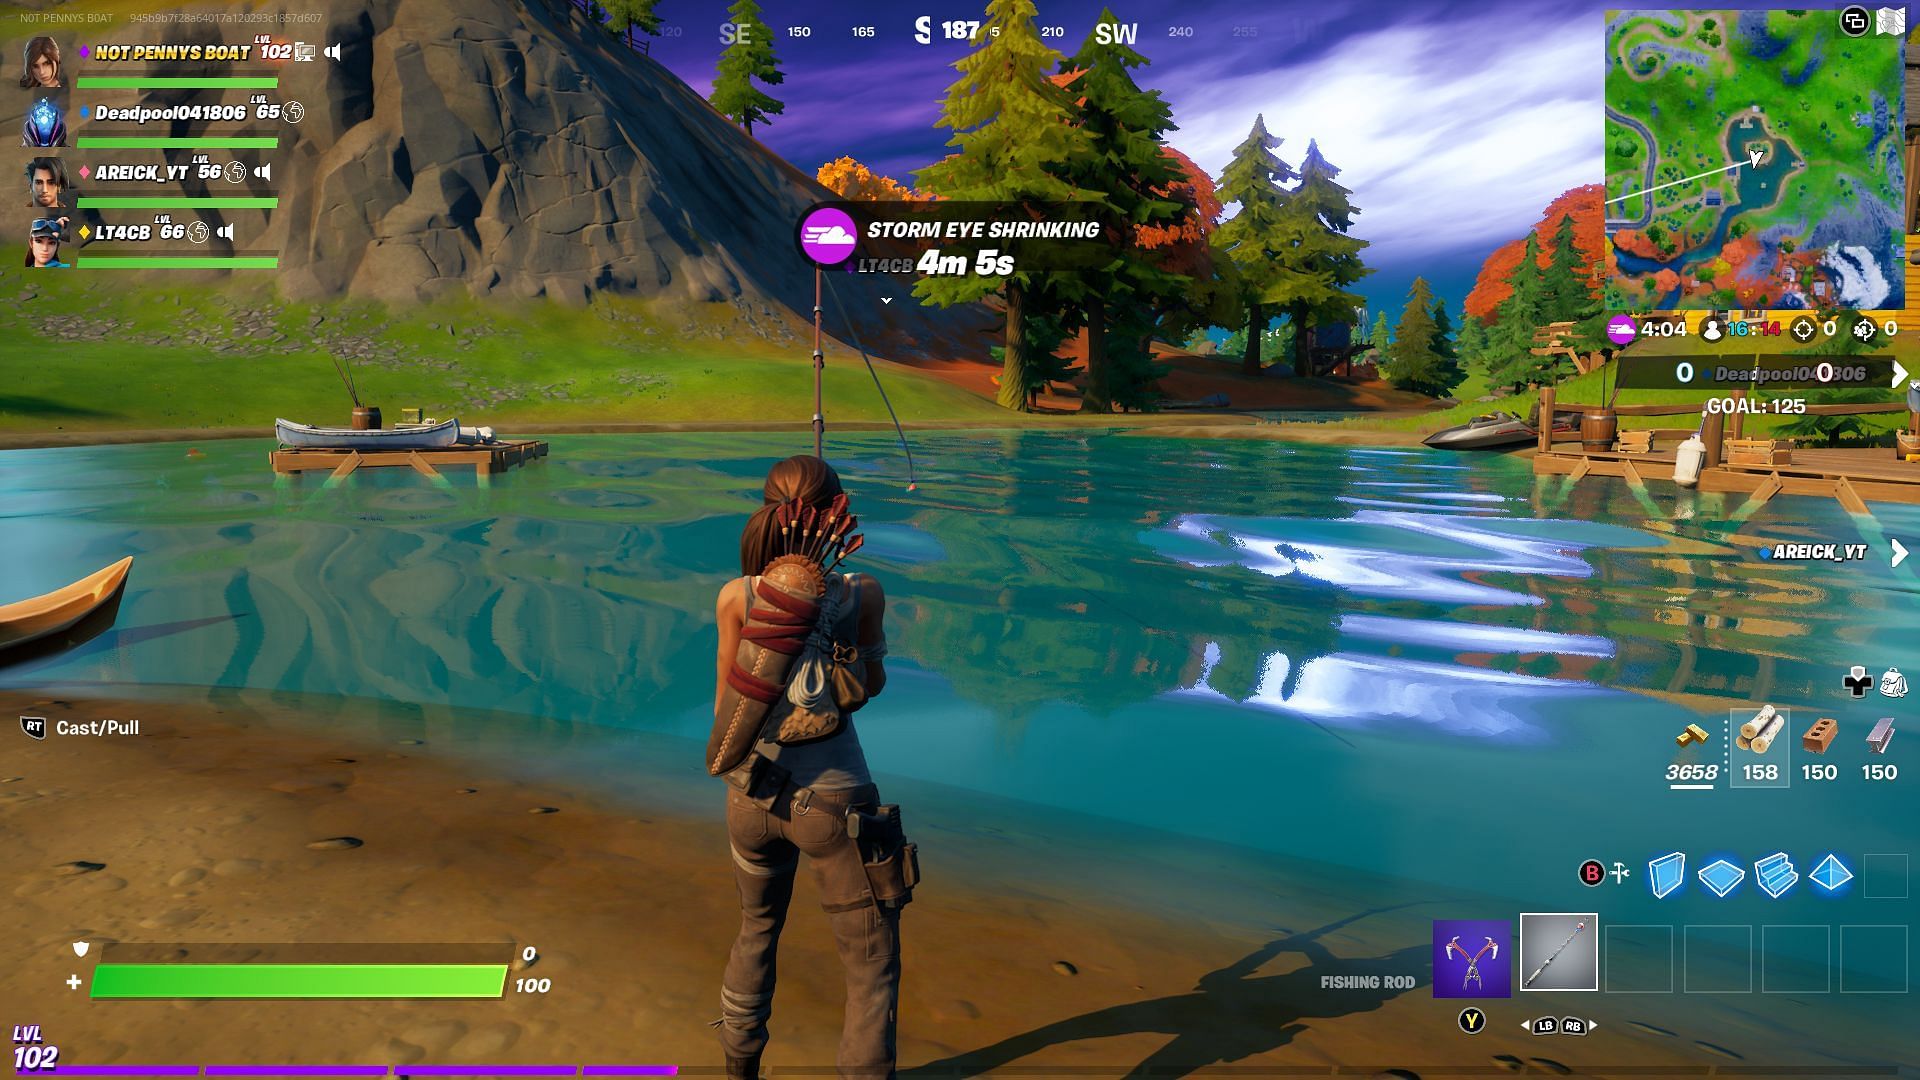 Players can begin fishing anywhere in the game world, not just fishing spots (Image via Epic Games)